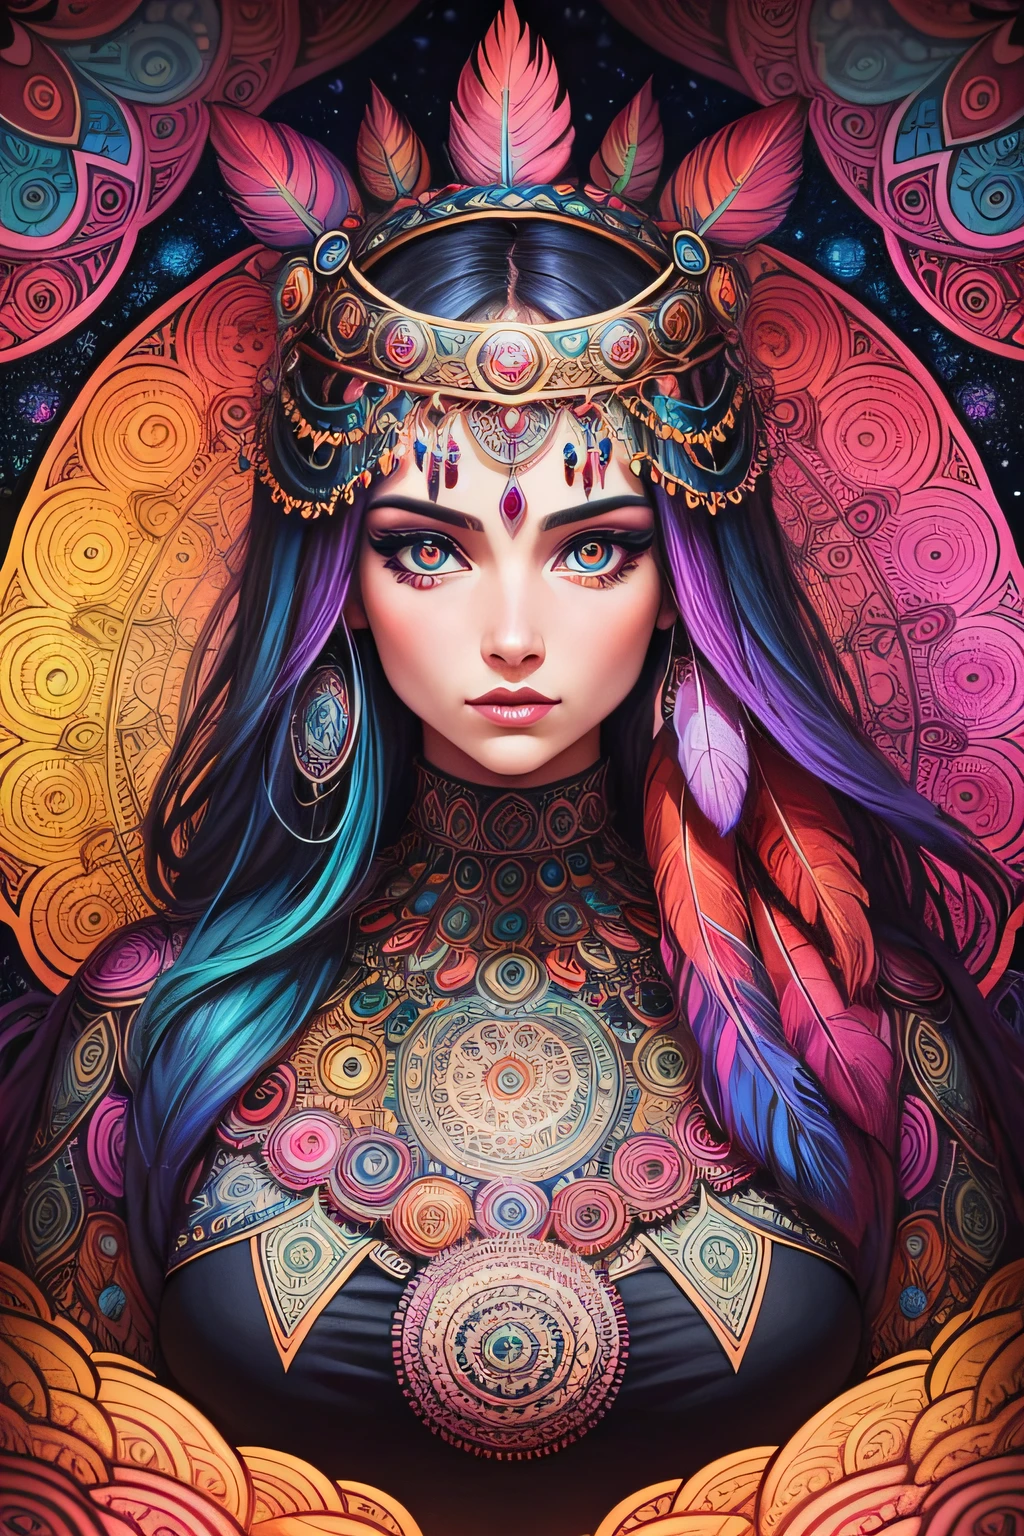 lot of detailed women psychedelic mandala with eyes and feathers in comics art style, magnificent vibrant colors and very structured details